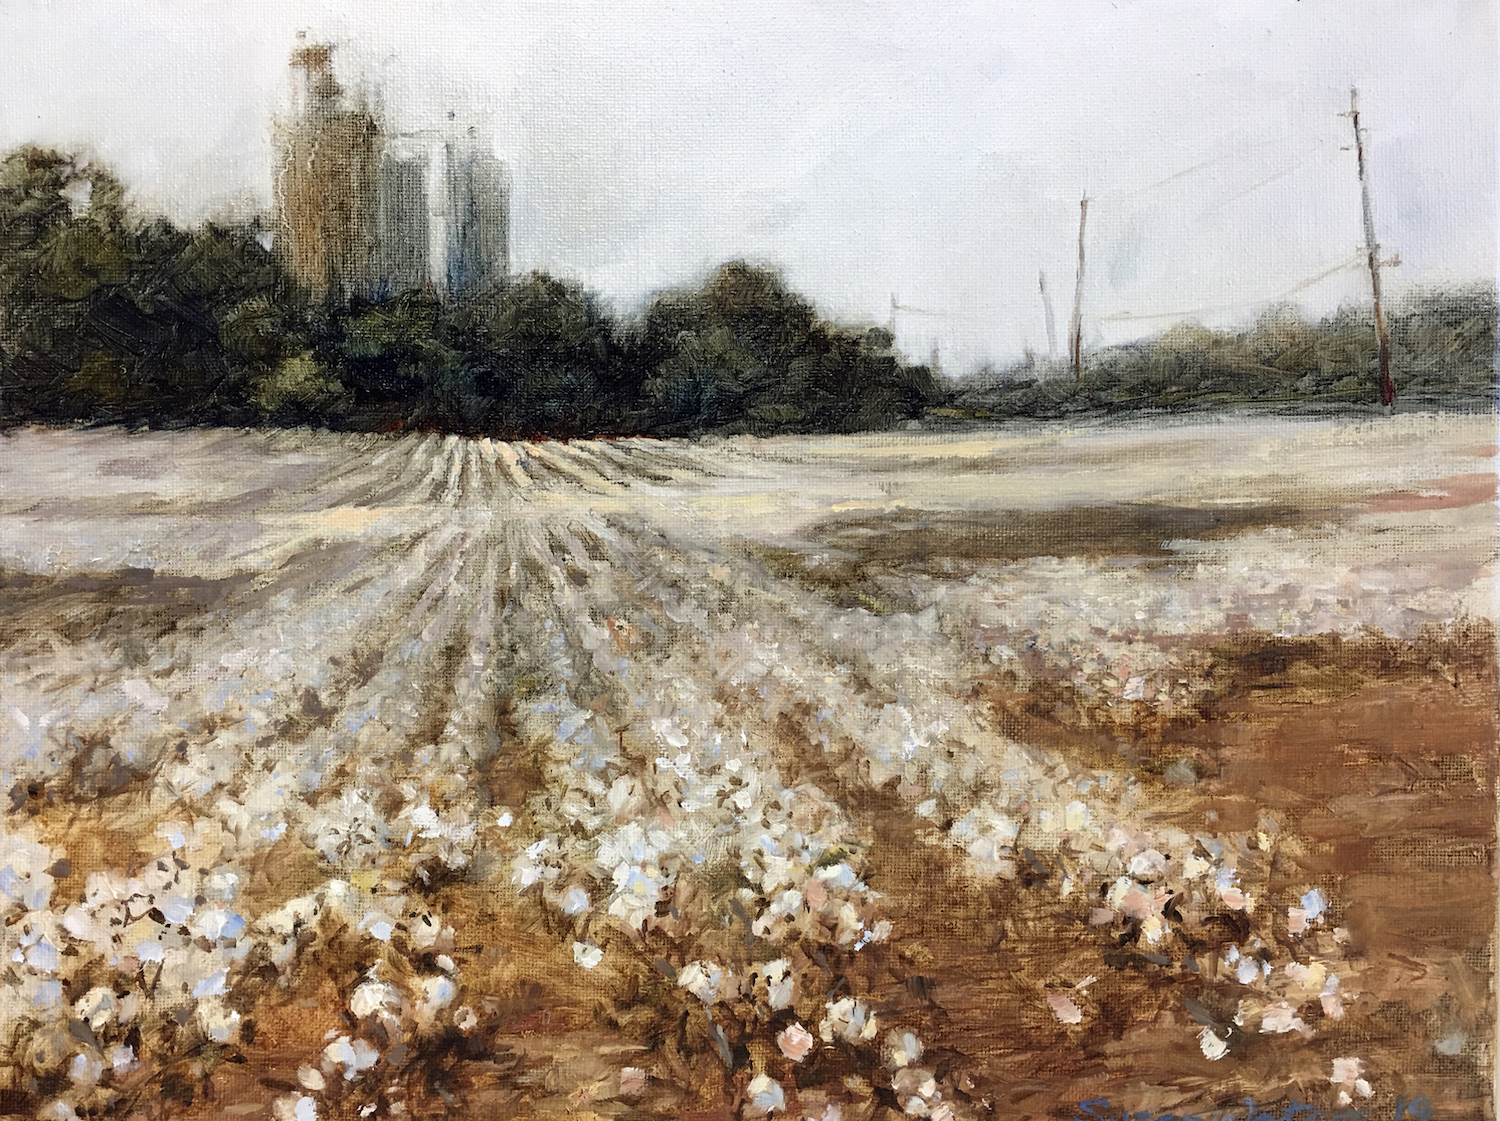 'Feed Plant And Cotton', Susan Waters, Oil on canvas, 28 x 36 cm